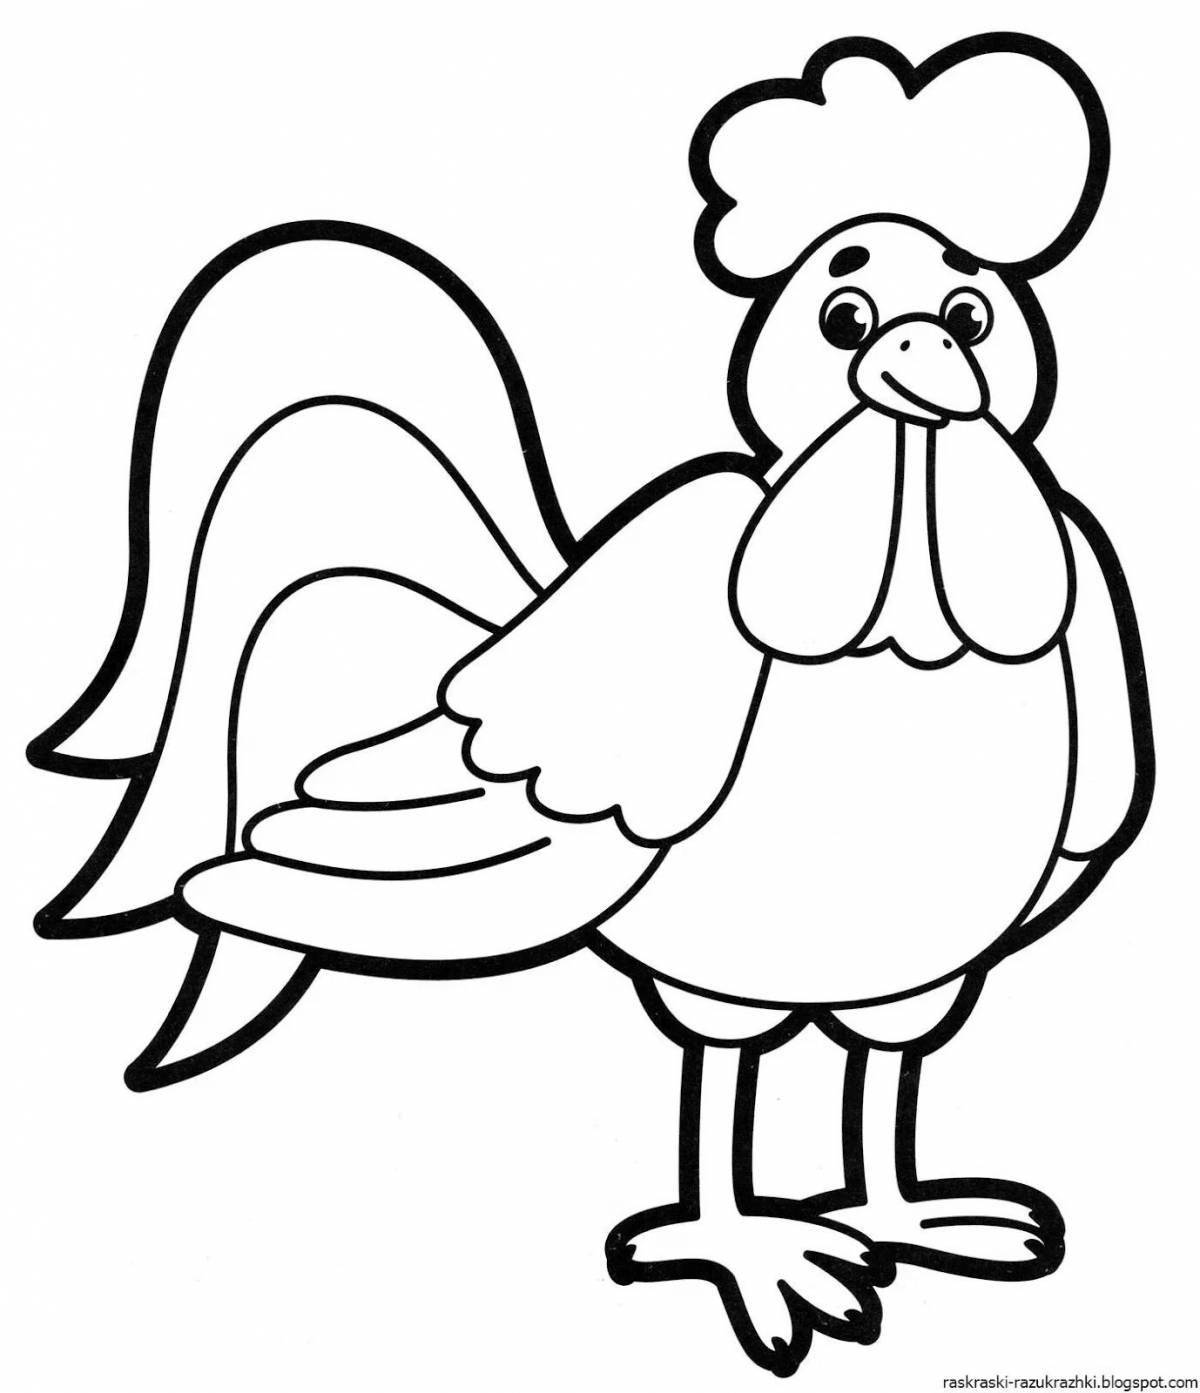 Fat cock coloring page for kids